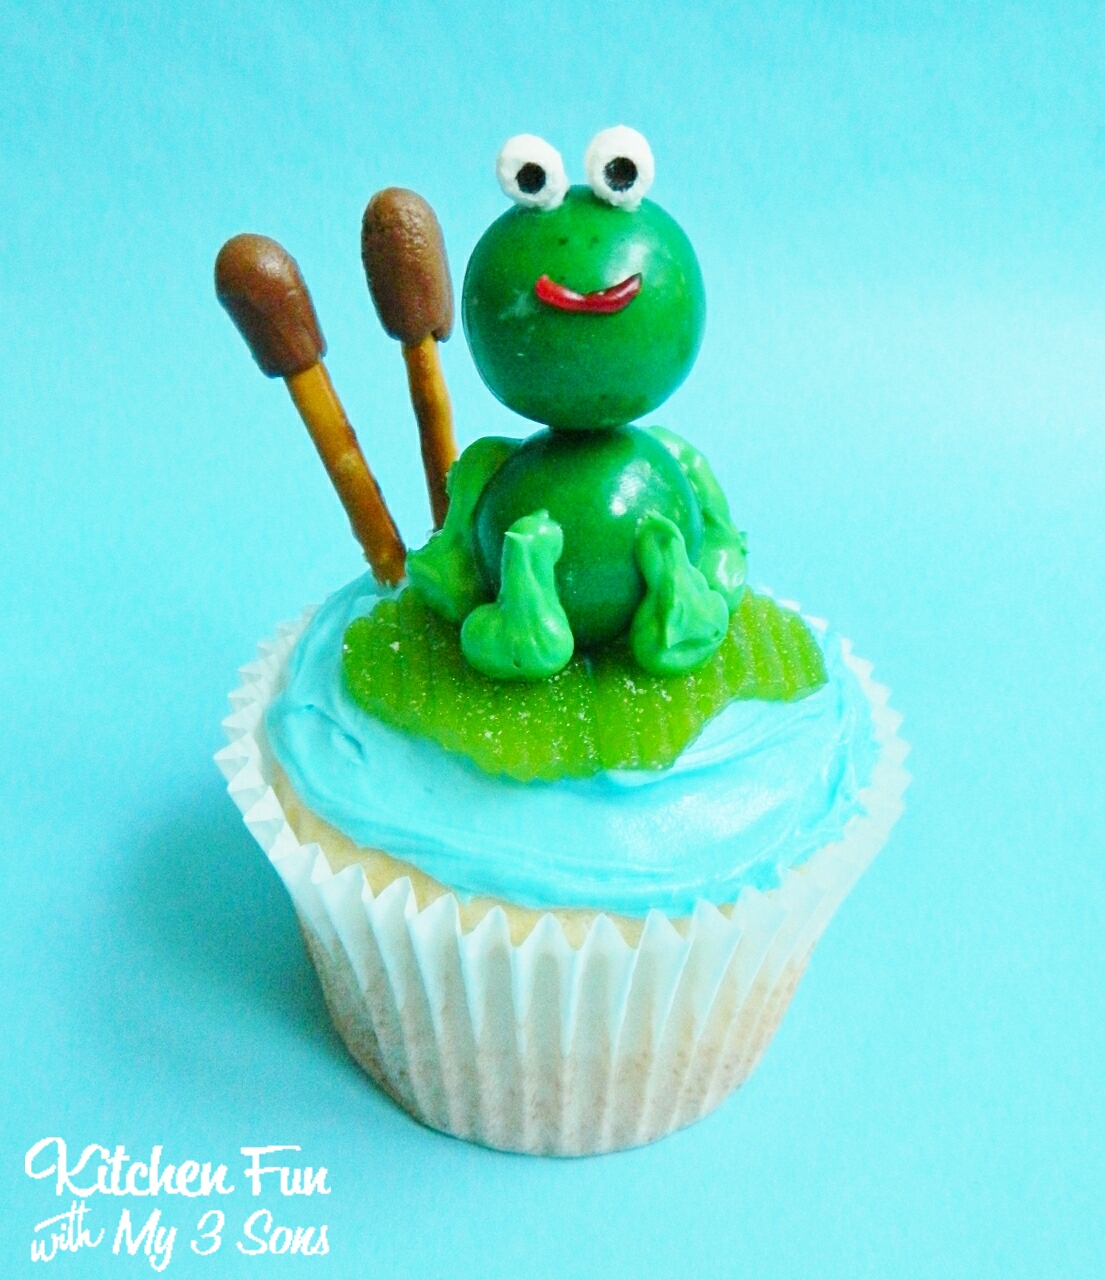 Cupcake Cake with Lily Pads and Frogs